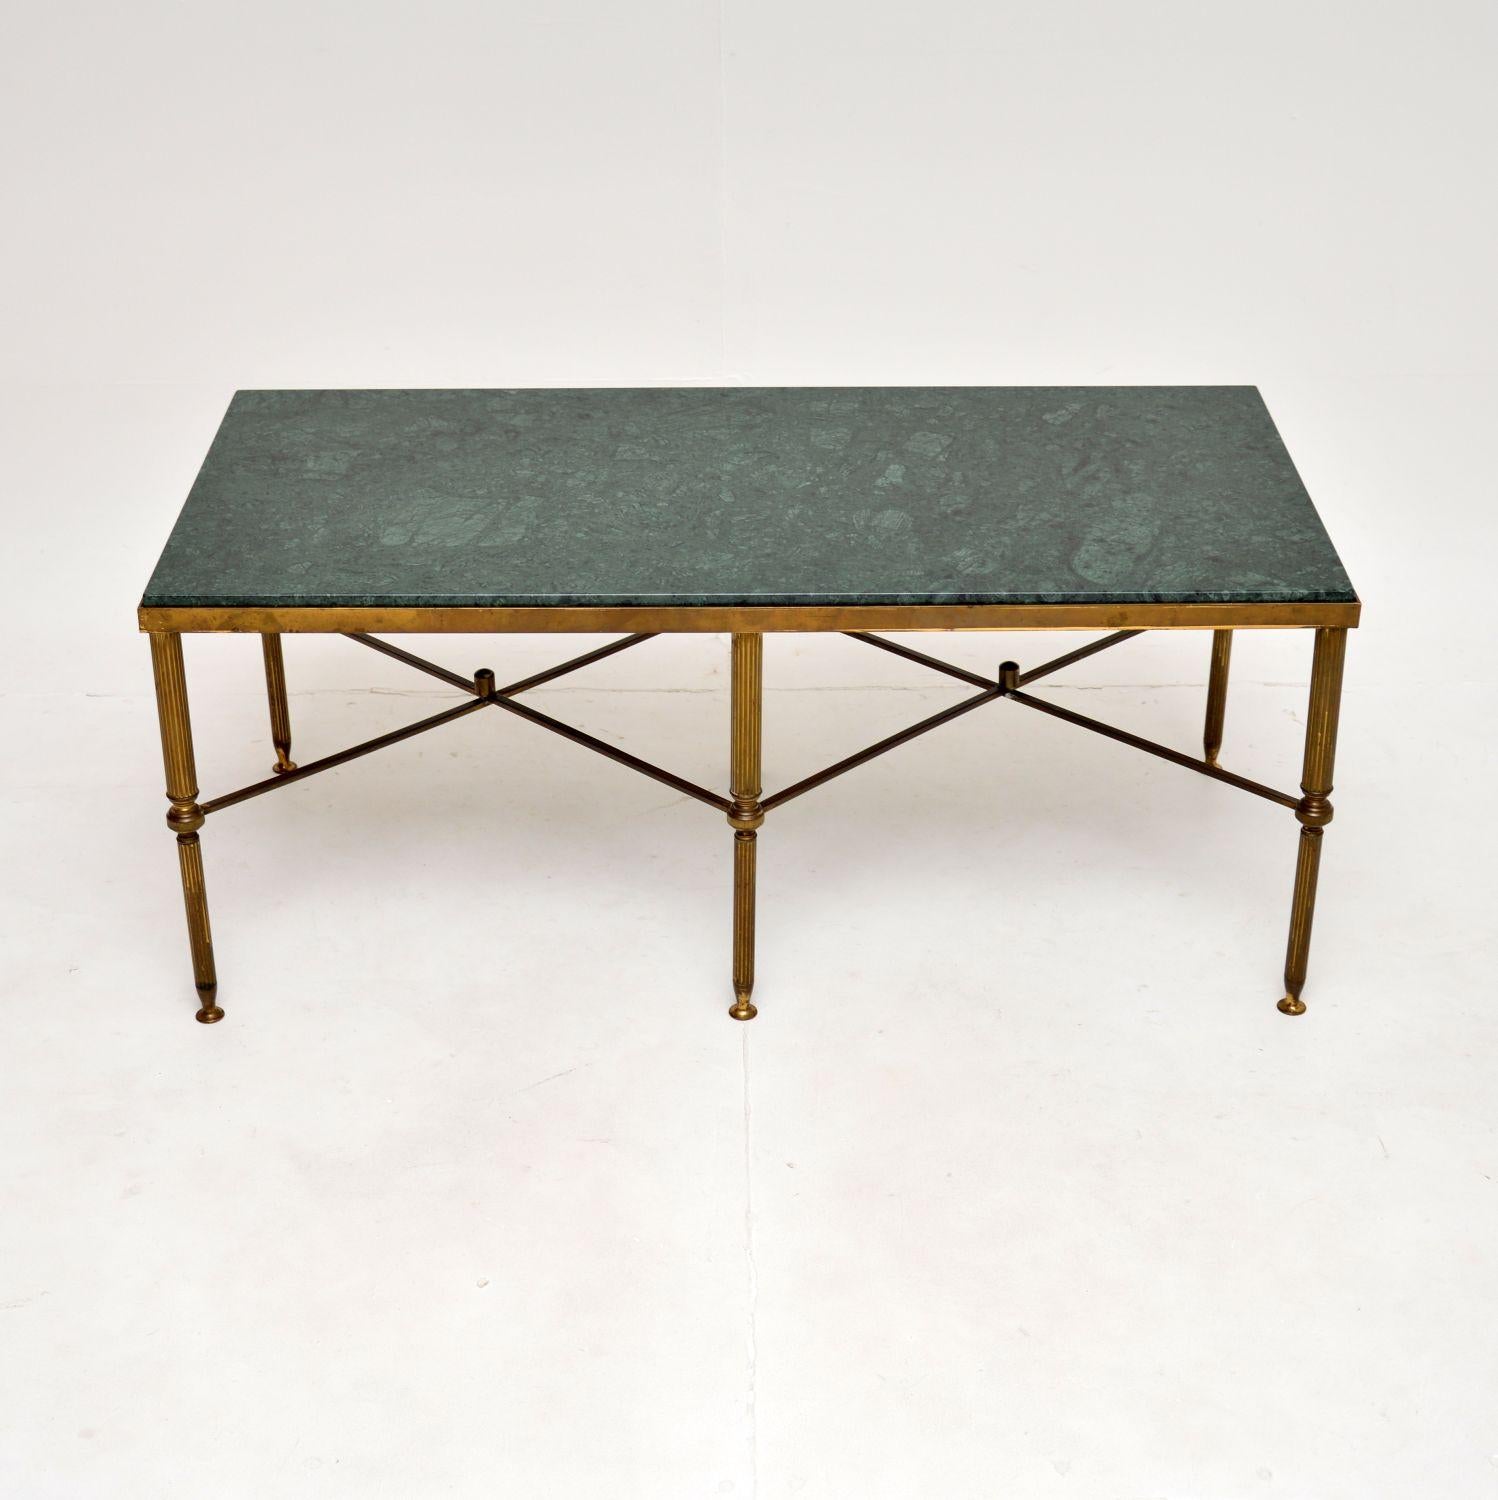 A stunning antique French marble top coffee table in brass. This was made in France, it dates from around the 1950’s.

It is of superb quality, the solid brass frame has a very beautiful and interesting cross stretchered design. The inset green